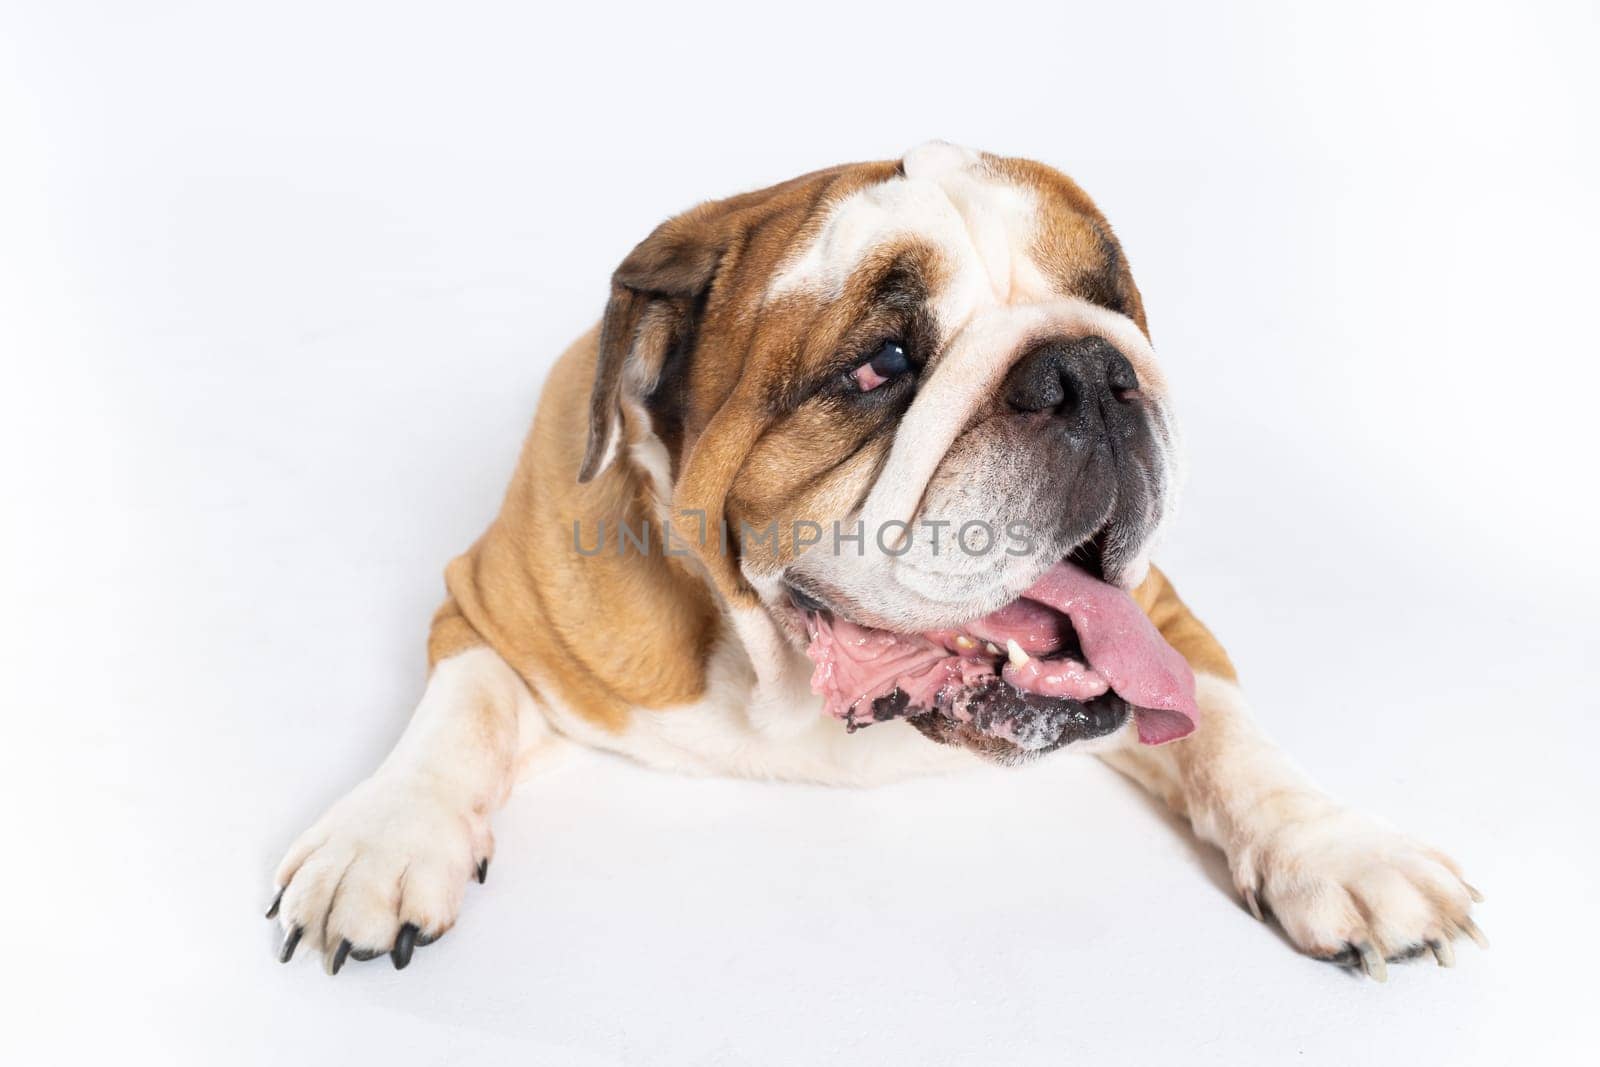 The dog is lying down with its mouth open. The English Bulldog was bred as a companion and deterrent dog. A breed with a brown coat with white patches.